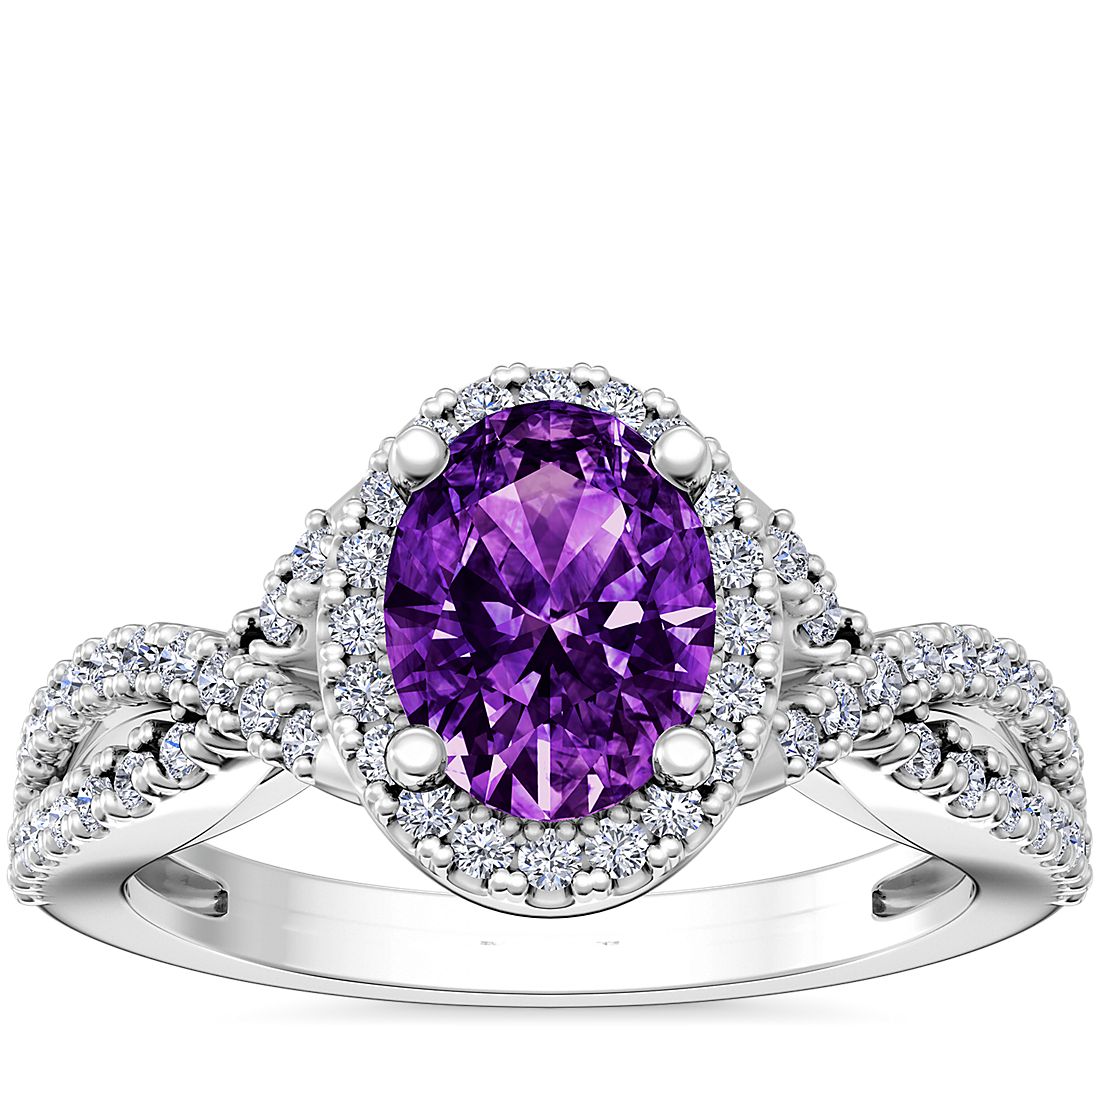 Twist Halo Diamond Engagement Ring with Oval Amethyst in Platinum (8x6mm)